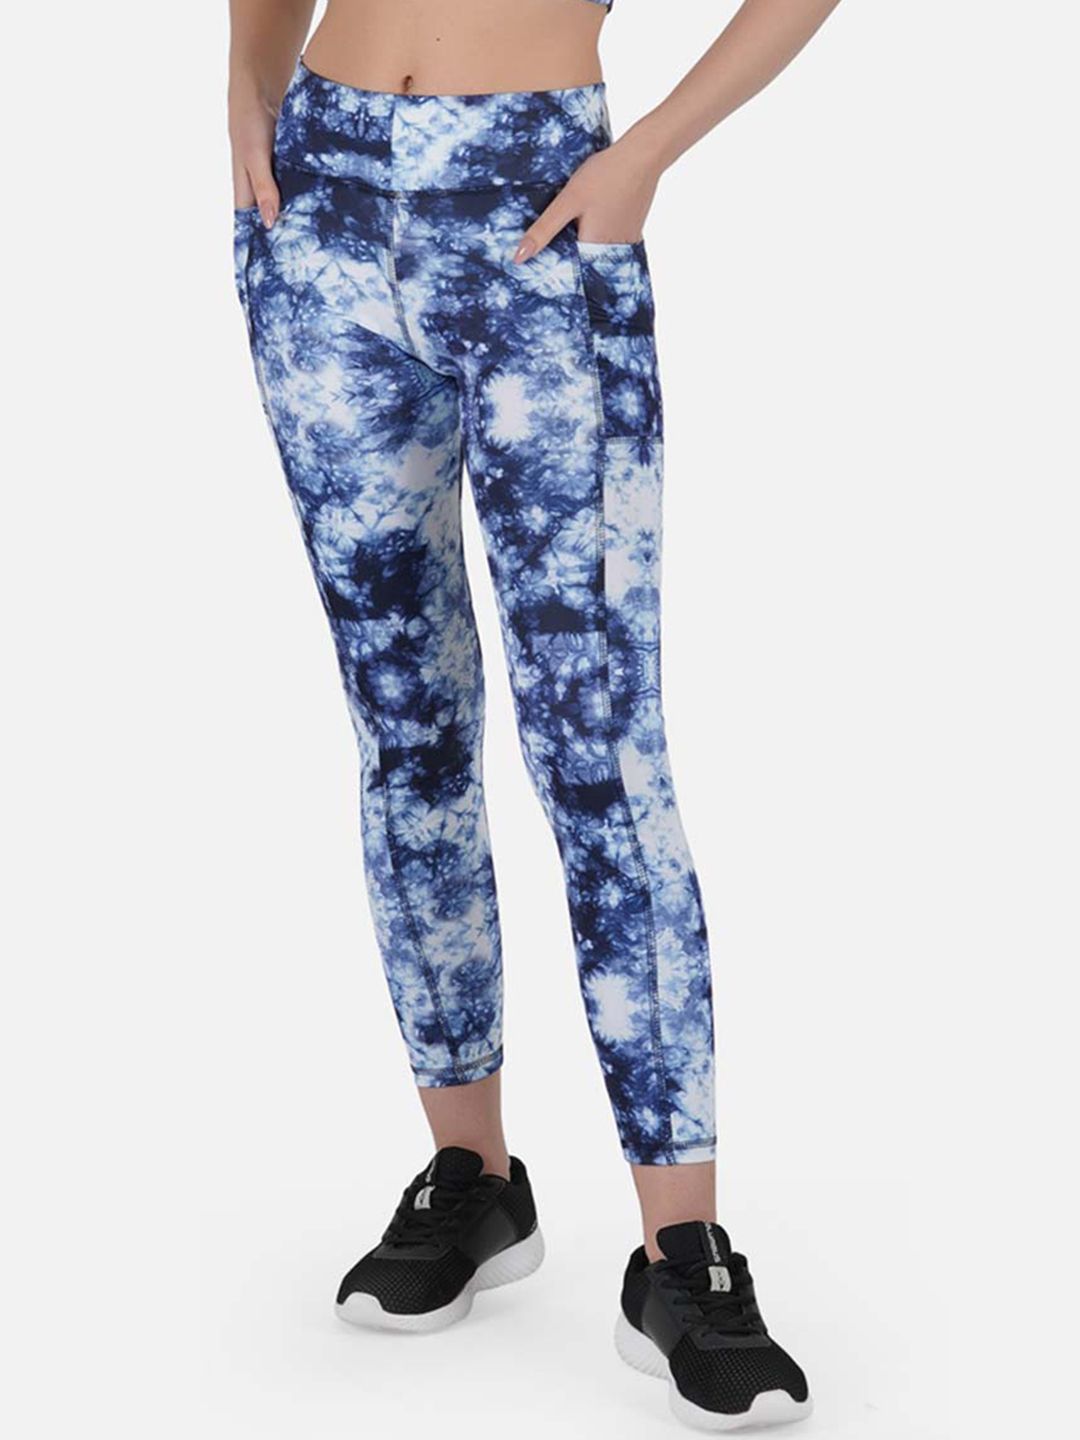 IMPERATIVE Women Blue & White Printed Slim-Fit Ankle-Length Dry-Fit Yoga Tights Price in India